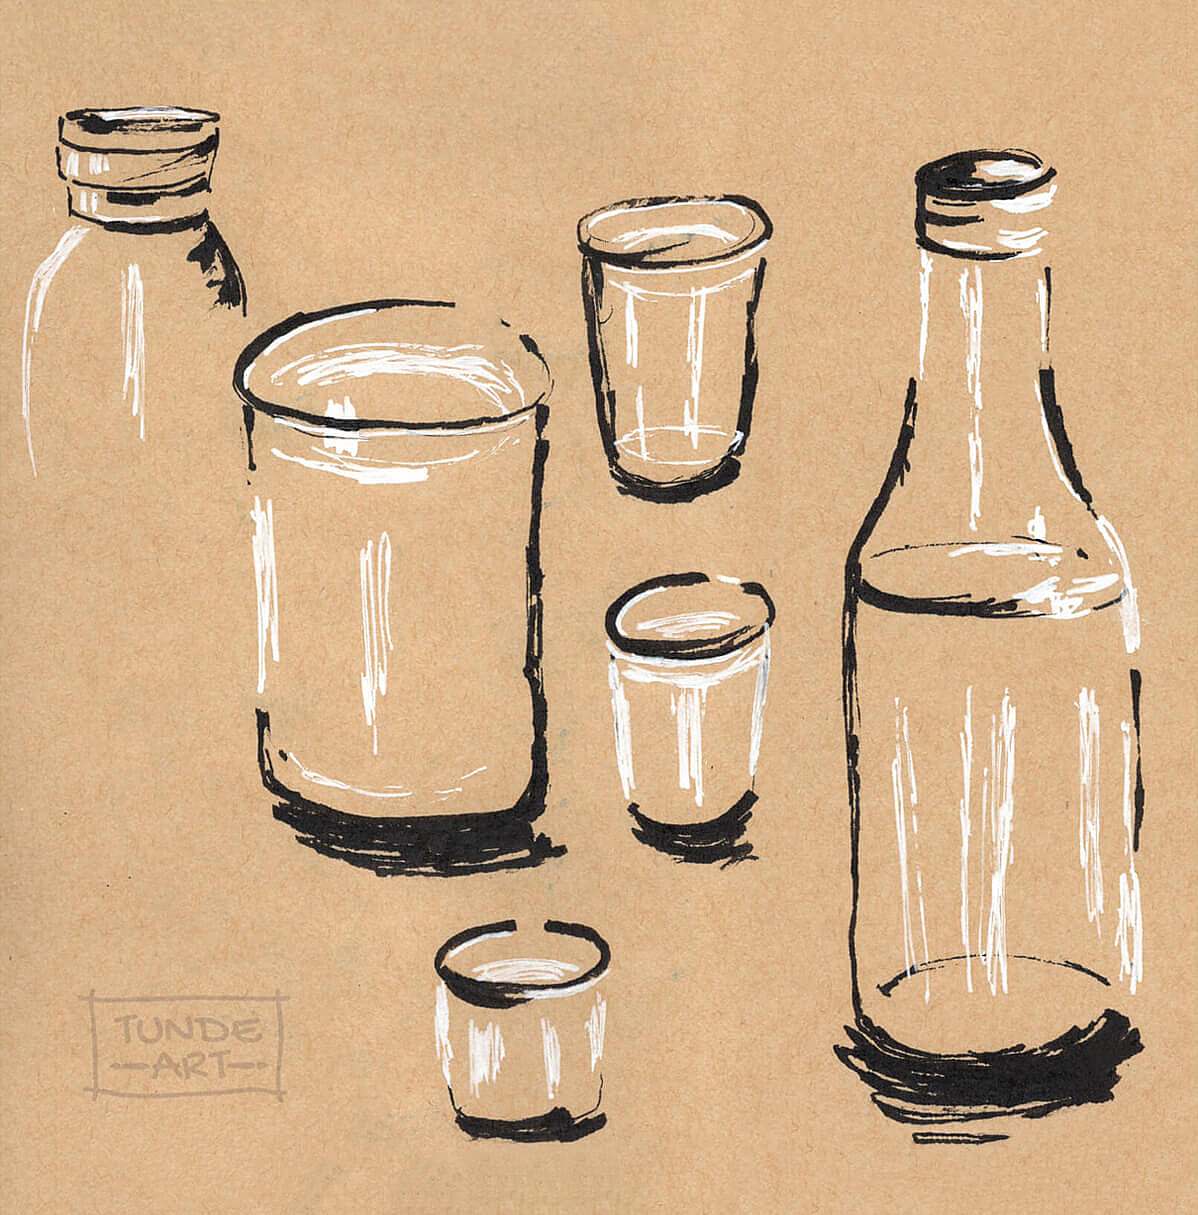 Glass Study on Toned Paper by Tunde Szentes